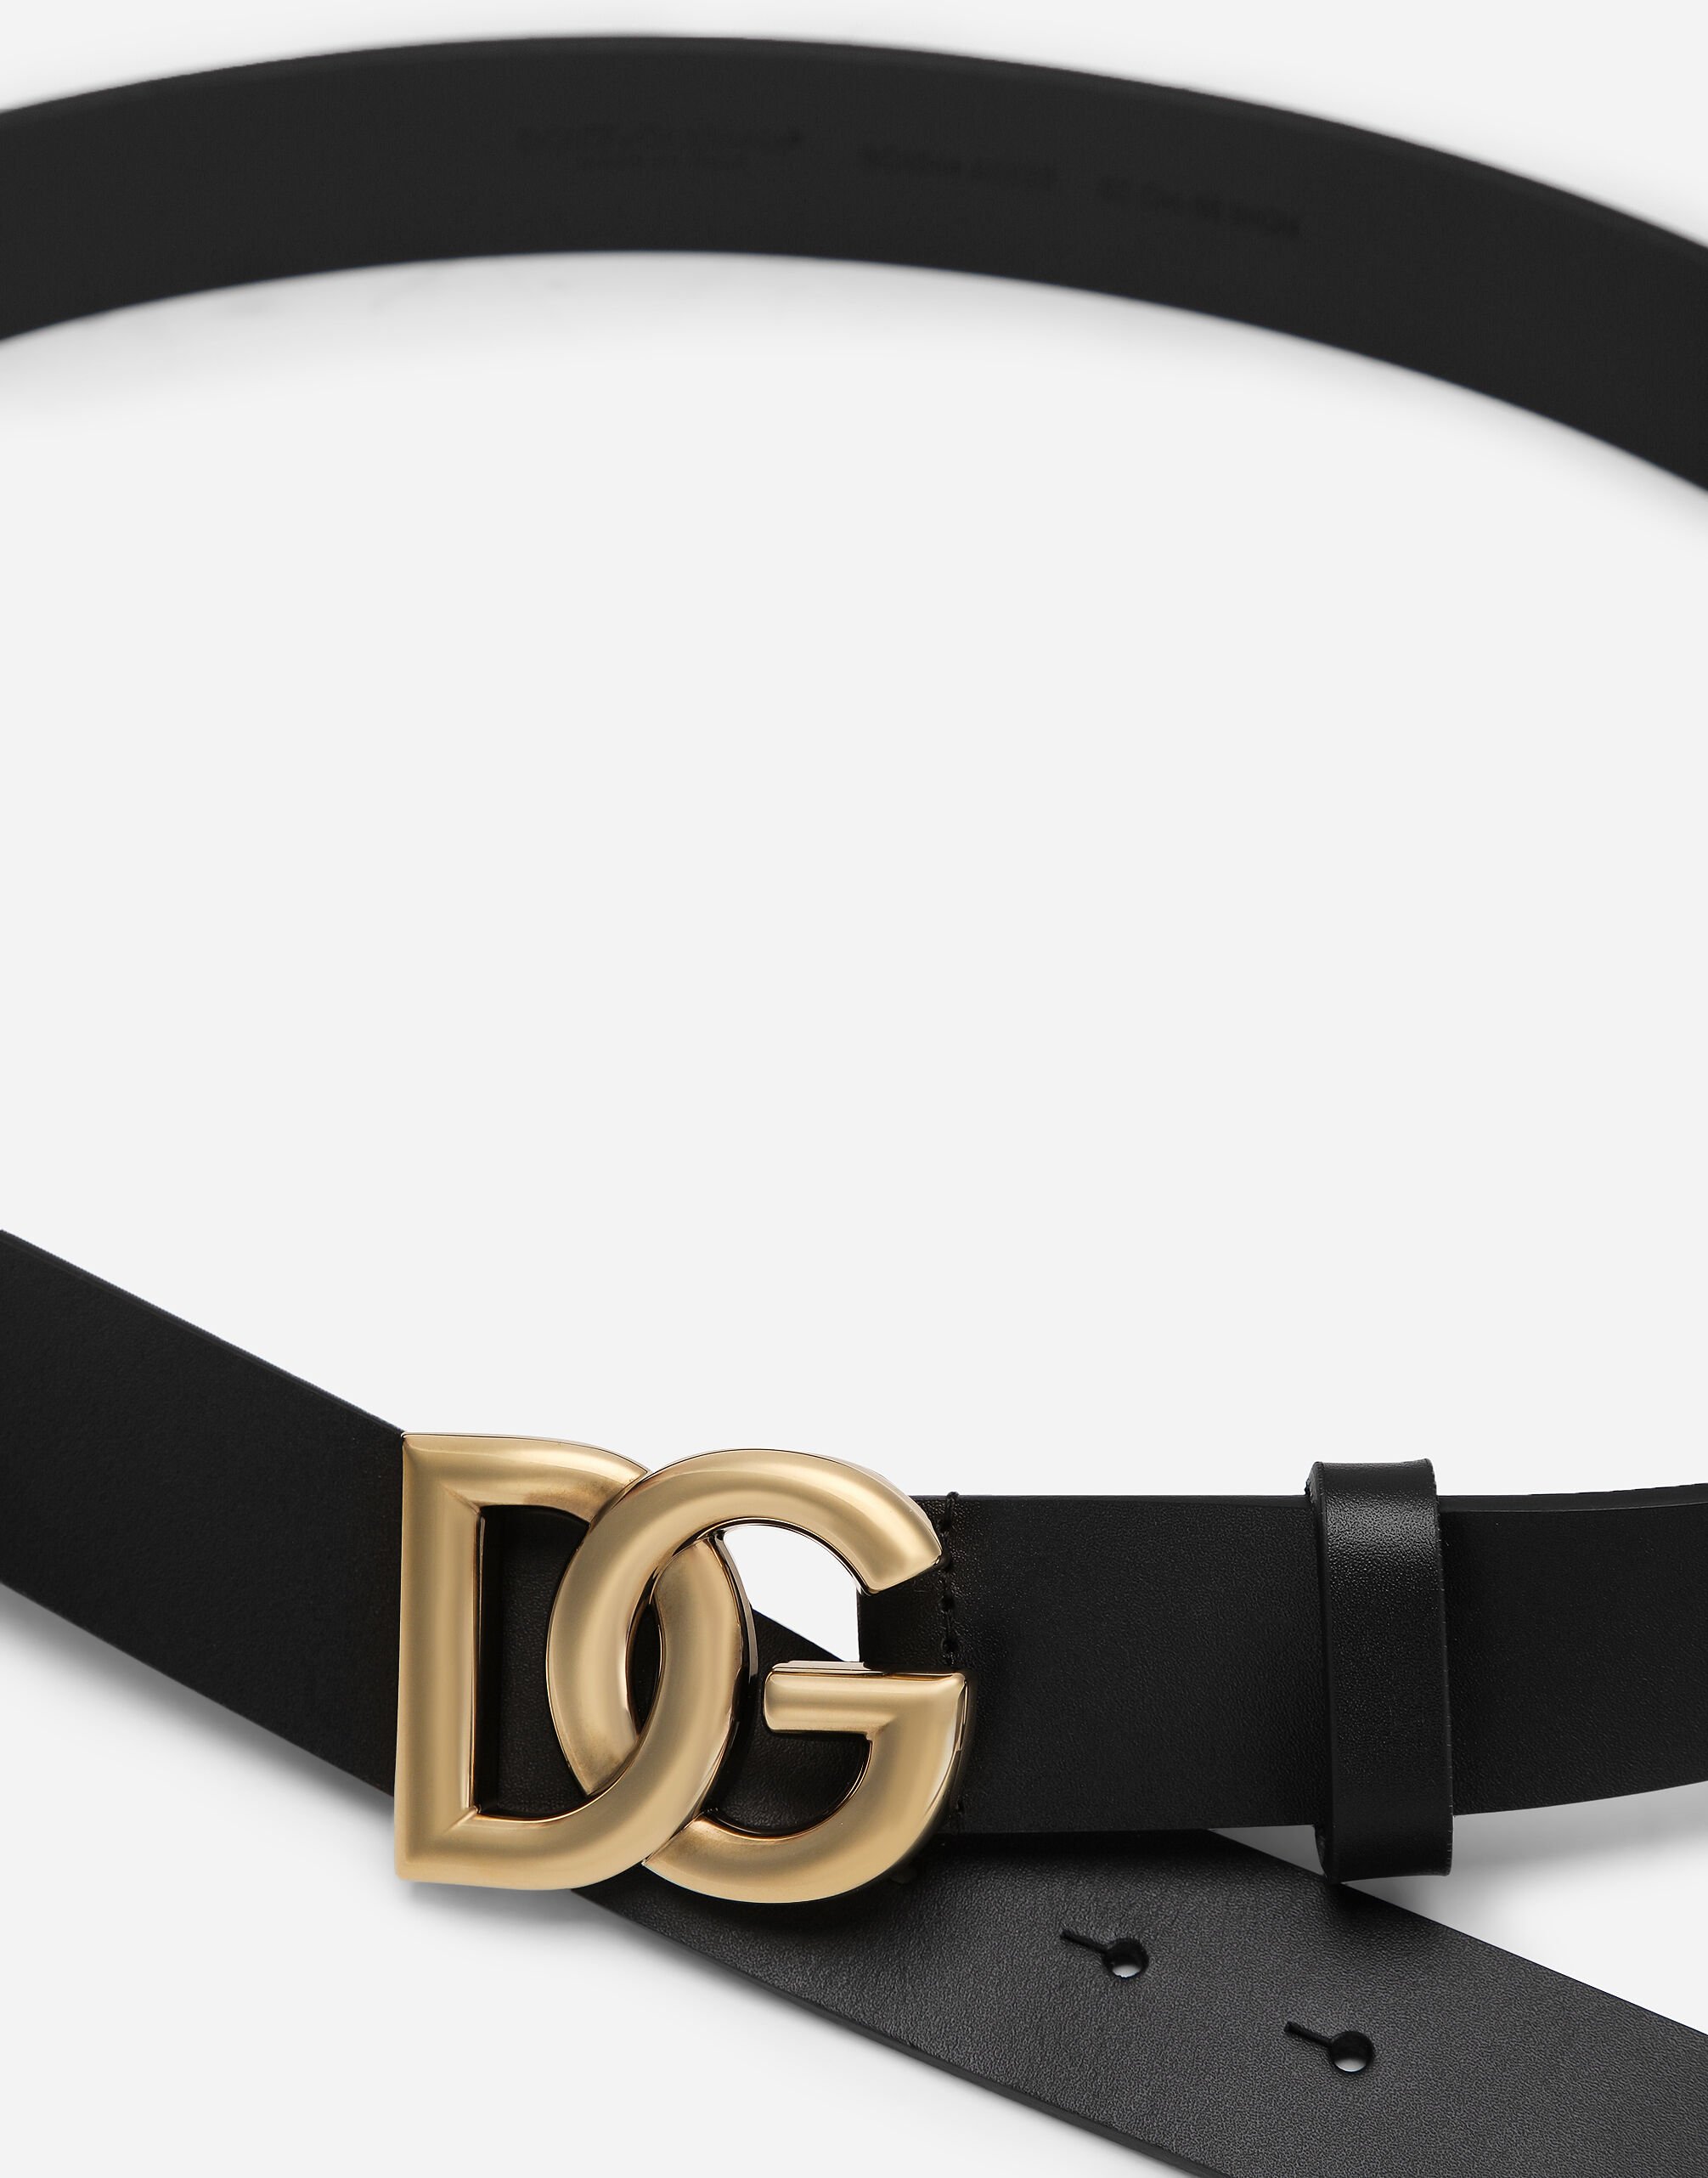 Lux leather belt with crossover DG logo buckle in Multicolor for 